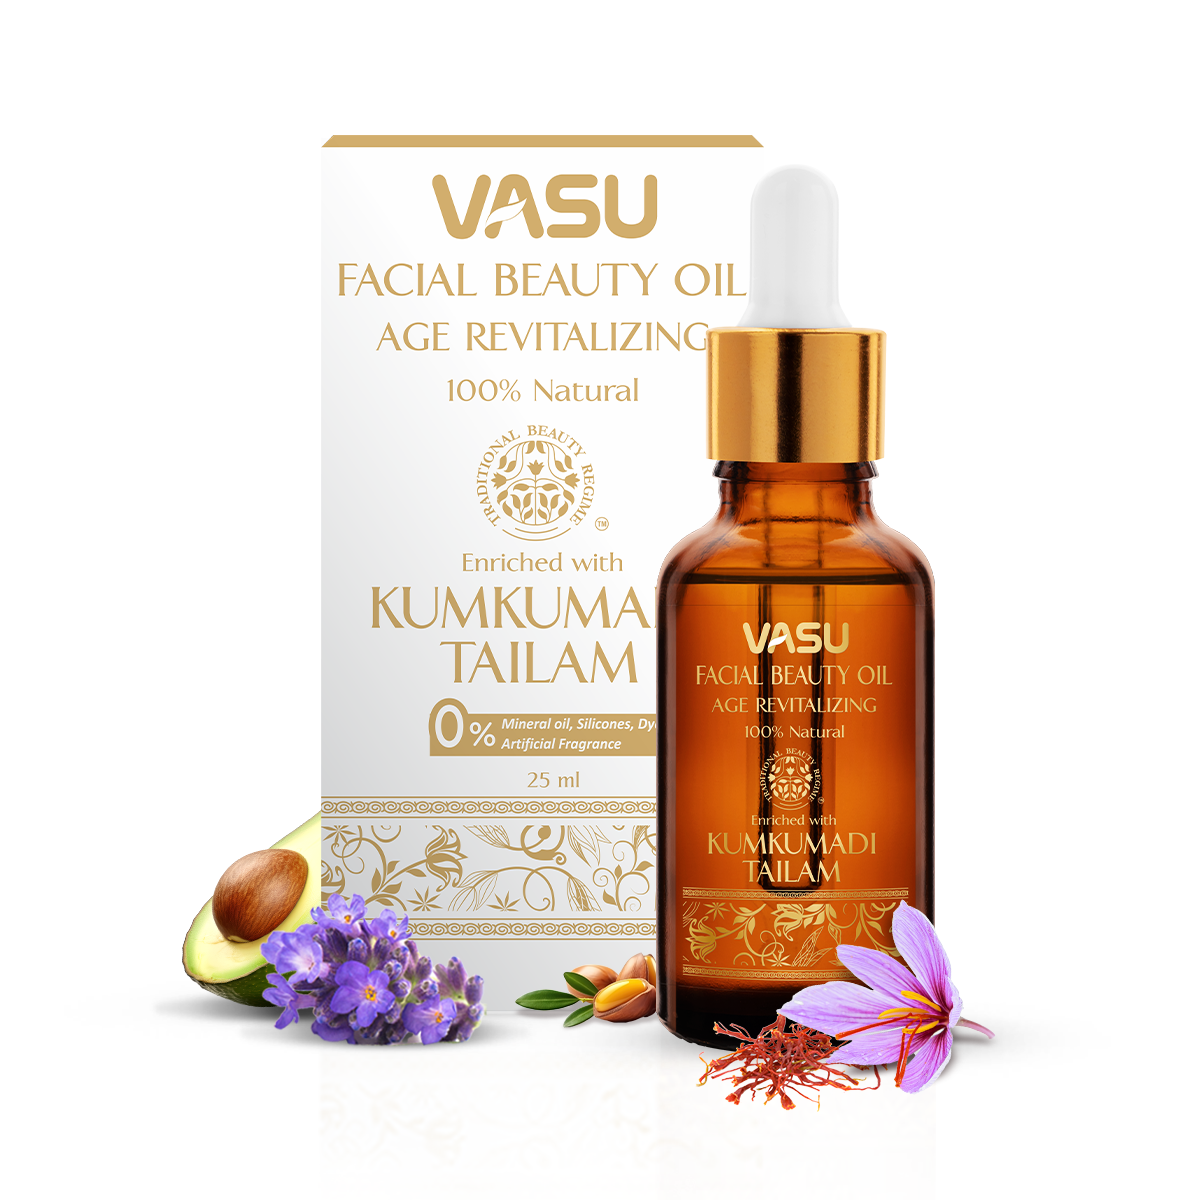 Vasu Facial Beauty Oil - Enriched with Kumkumadi Tailam -Age Revitalizing - Reduce Hyperpigmentation & Age Spots - Gives Natural Glow to Your Face - 100% Natural